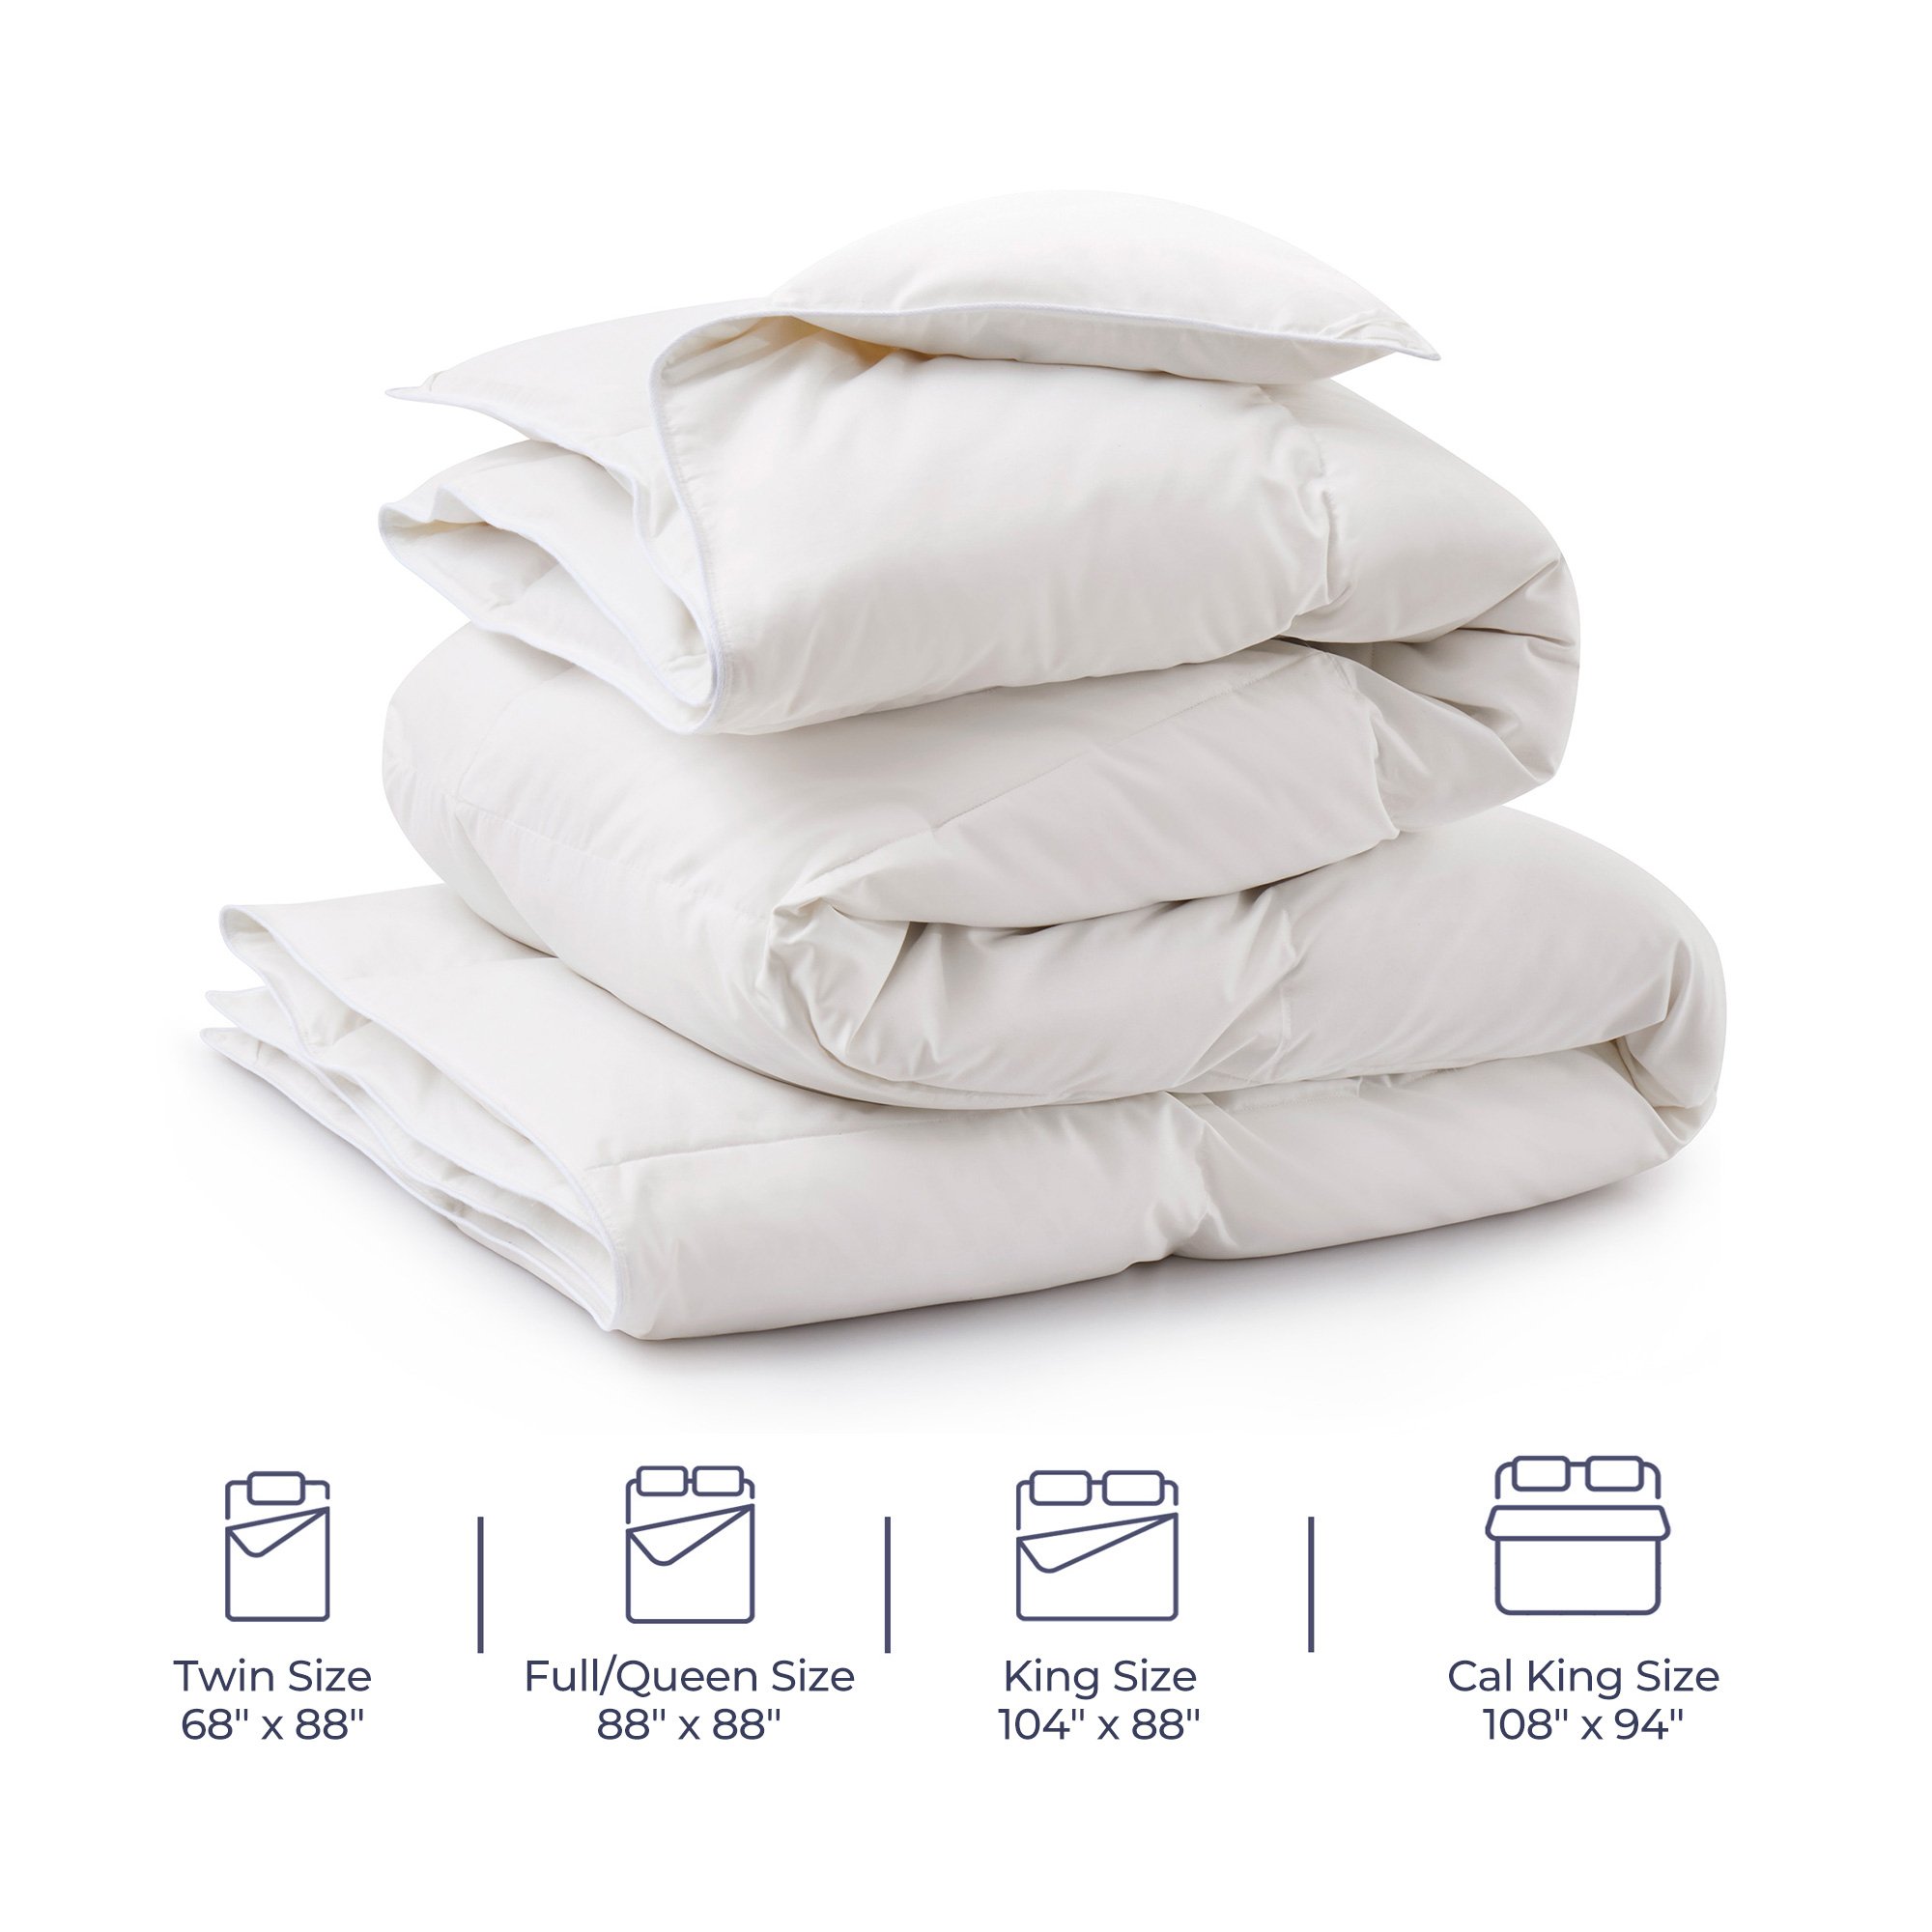 Premium All Seasons White Goose Feather Fiber And Down Comforter - Lucent White, Cal King